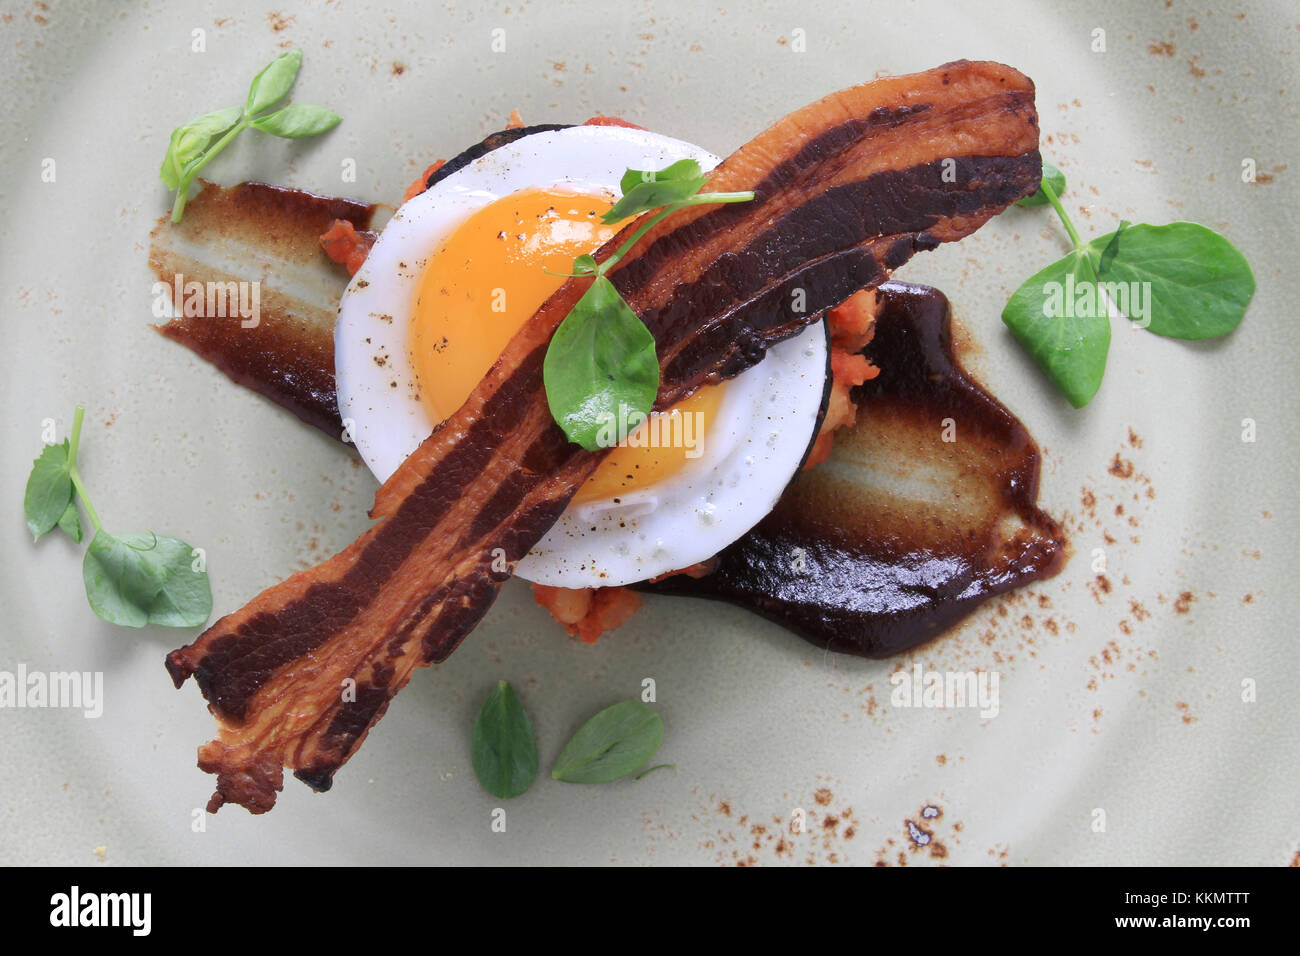 Bacon Egg Black Pudding Baked Beans Plated Meal Stock Photo